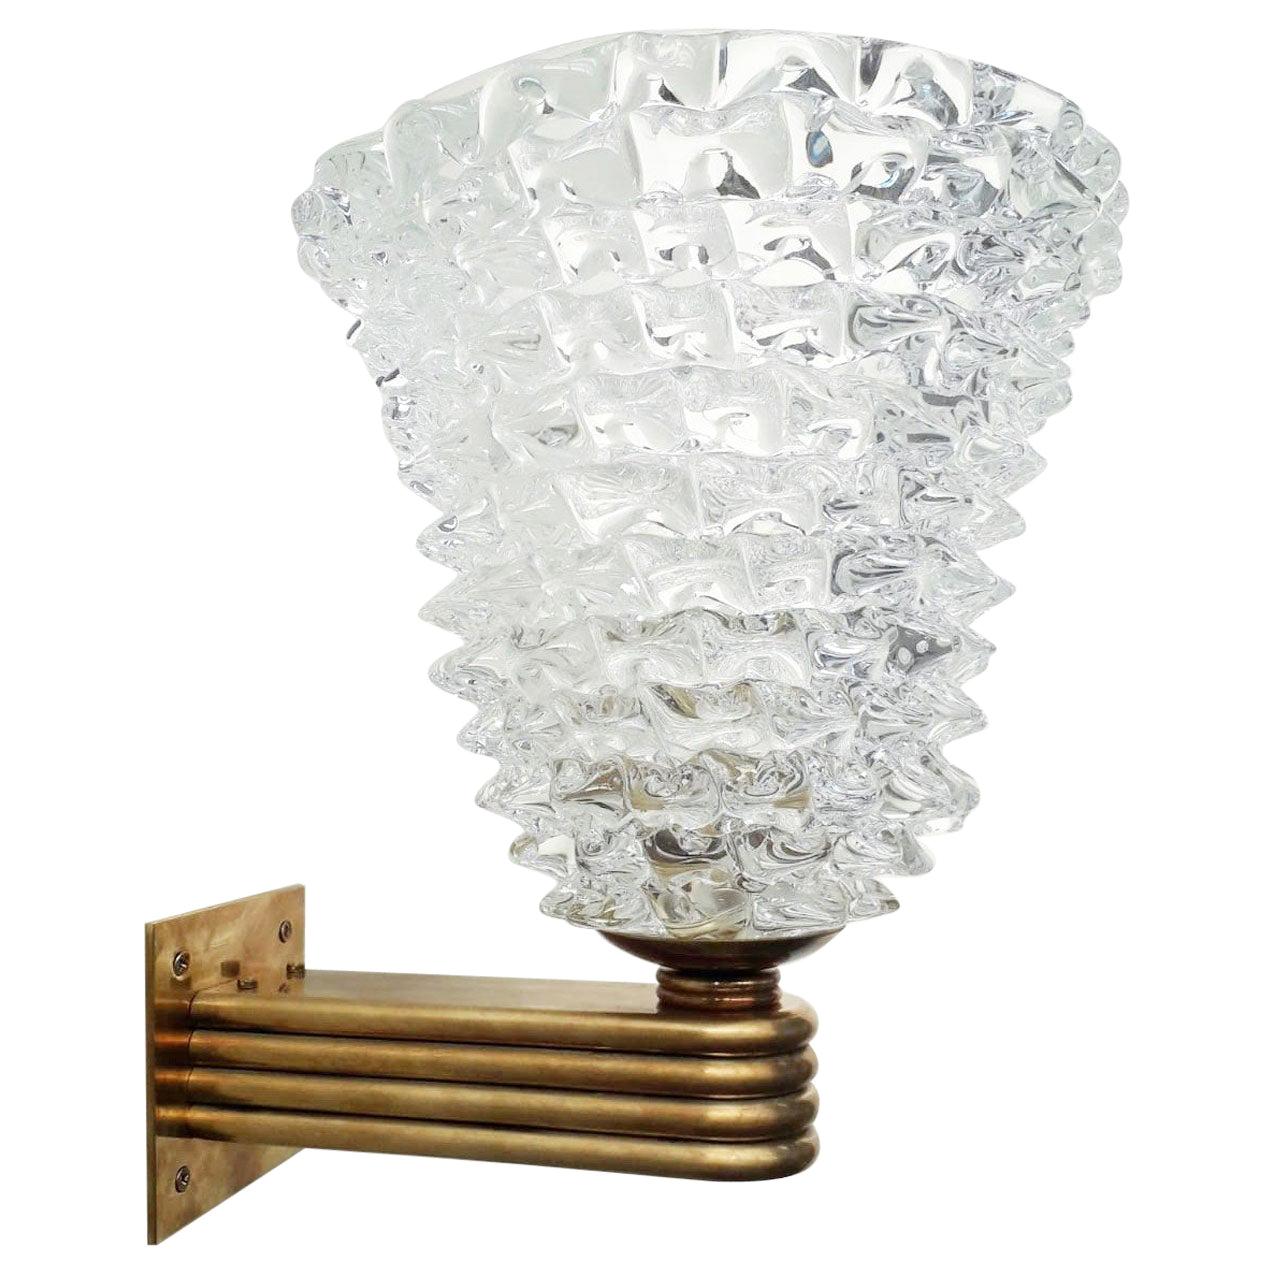 Original vintage Italian wall lights with clear Murano glass hand blown to create a beaked textured effect using Rostrato technique, mounted on brass bracket / Designed by Barovier e Toso, circa 1960s with original Barovier e Toso maker's mark on